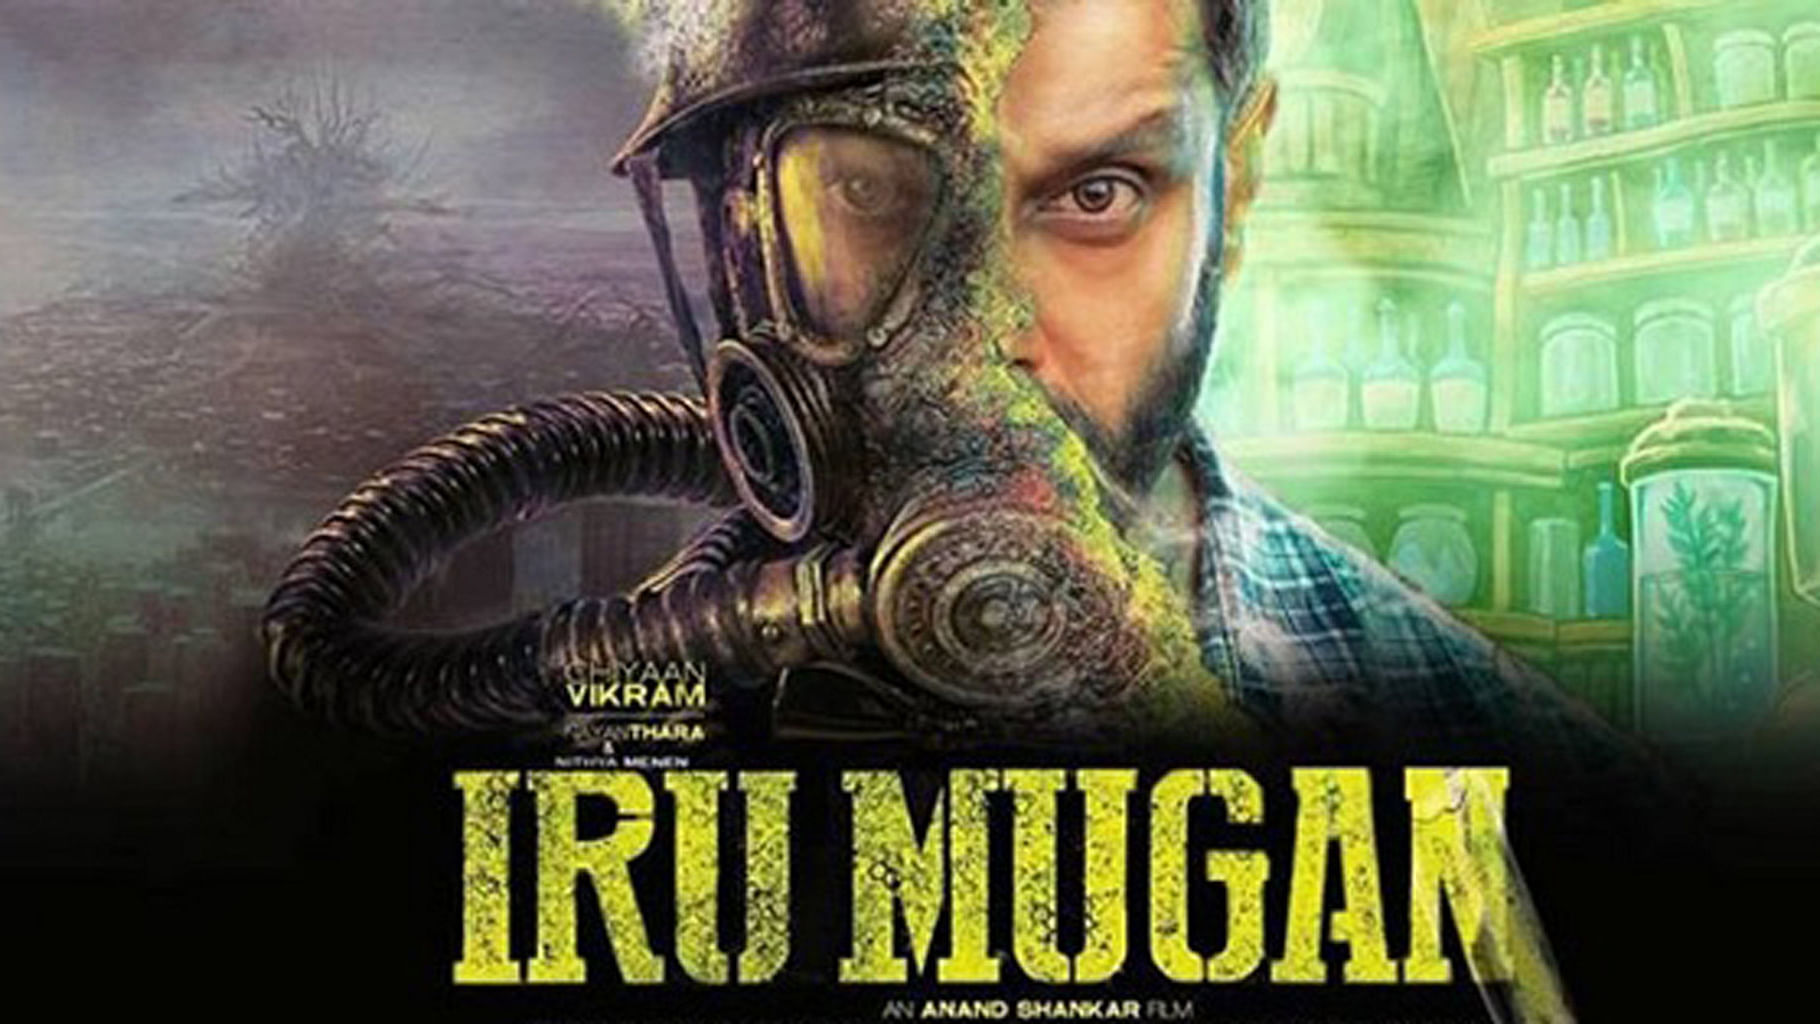 Chiyaan Vikram in Iru Mugan (Two Face). Starts well, until the first dialogue. (Photo: YouTube/Sony Music India)